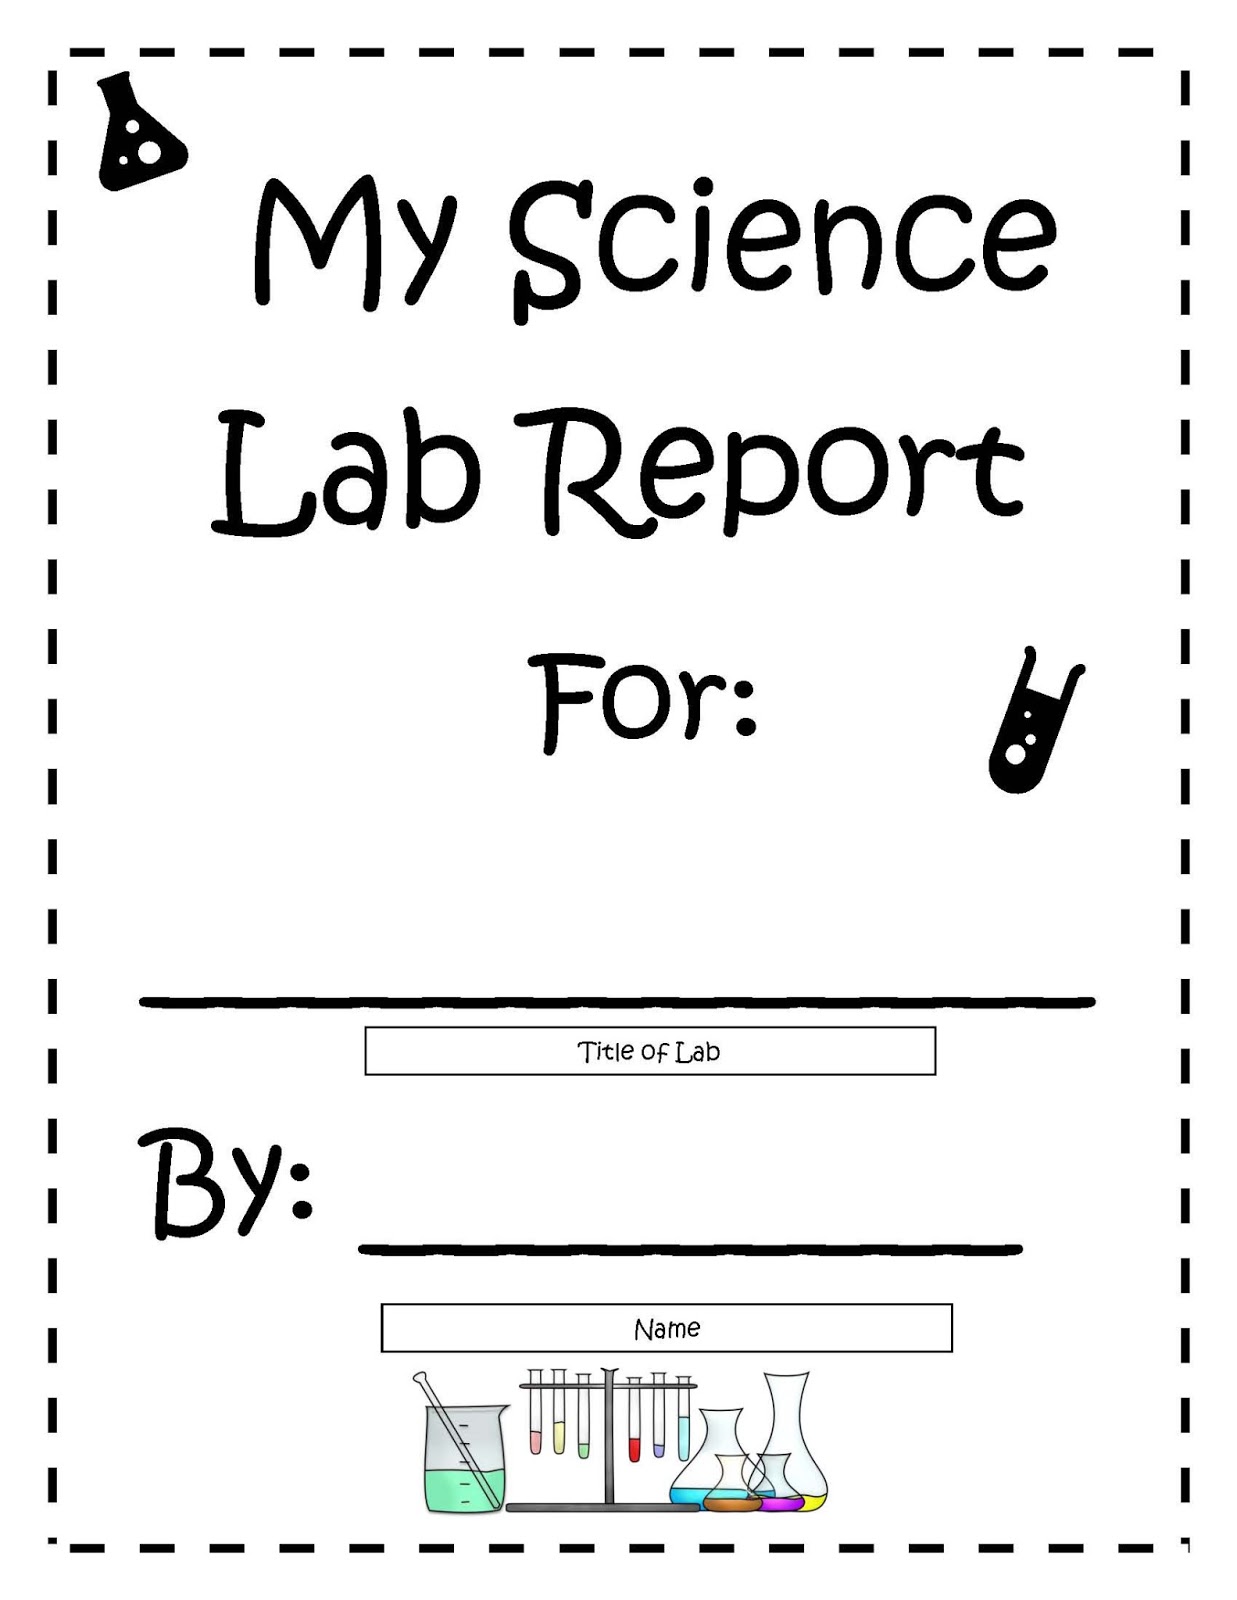 Writing a science report